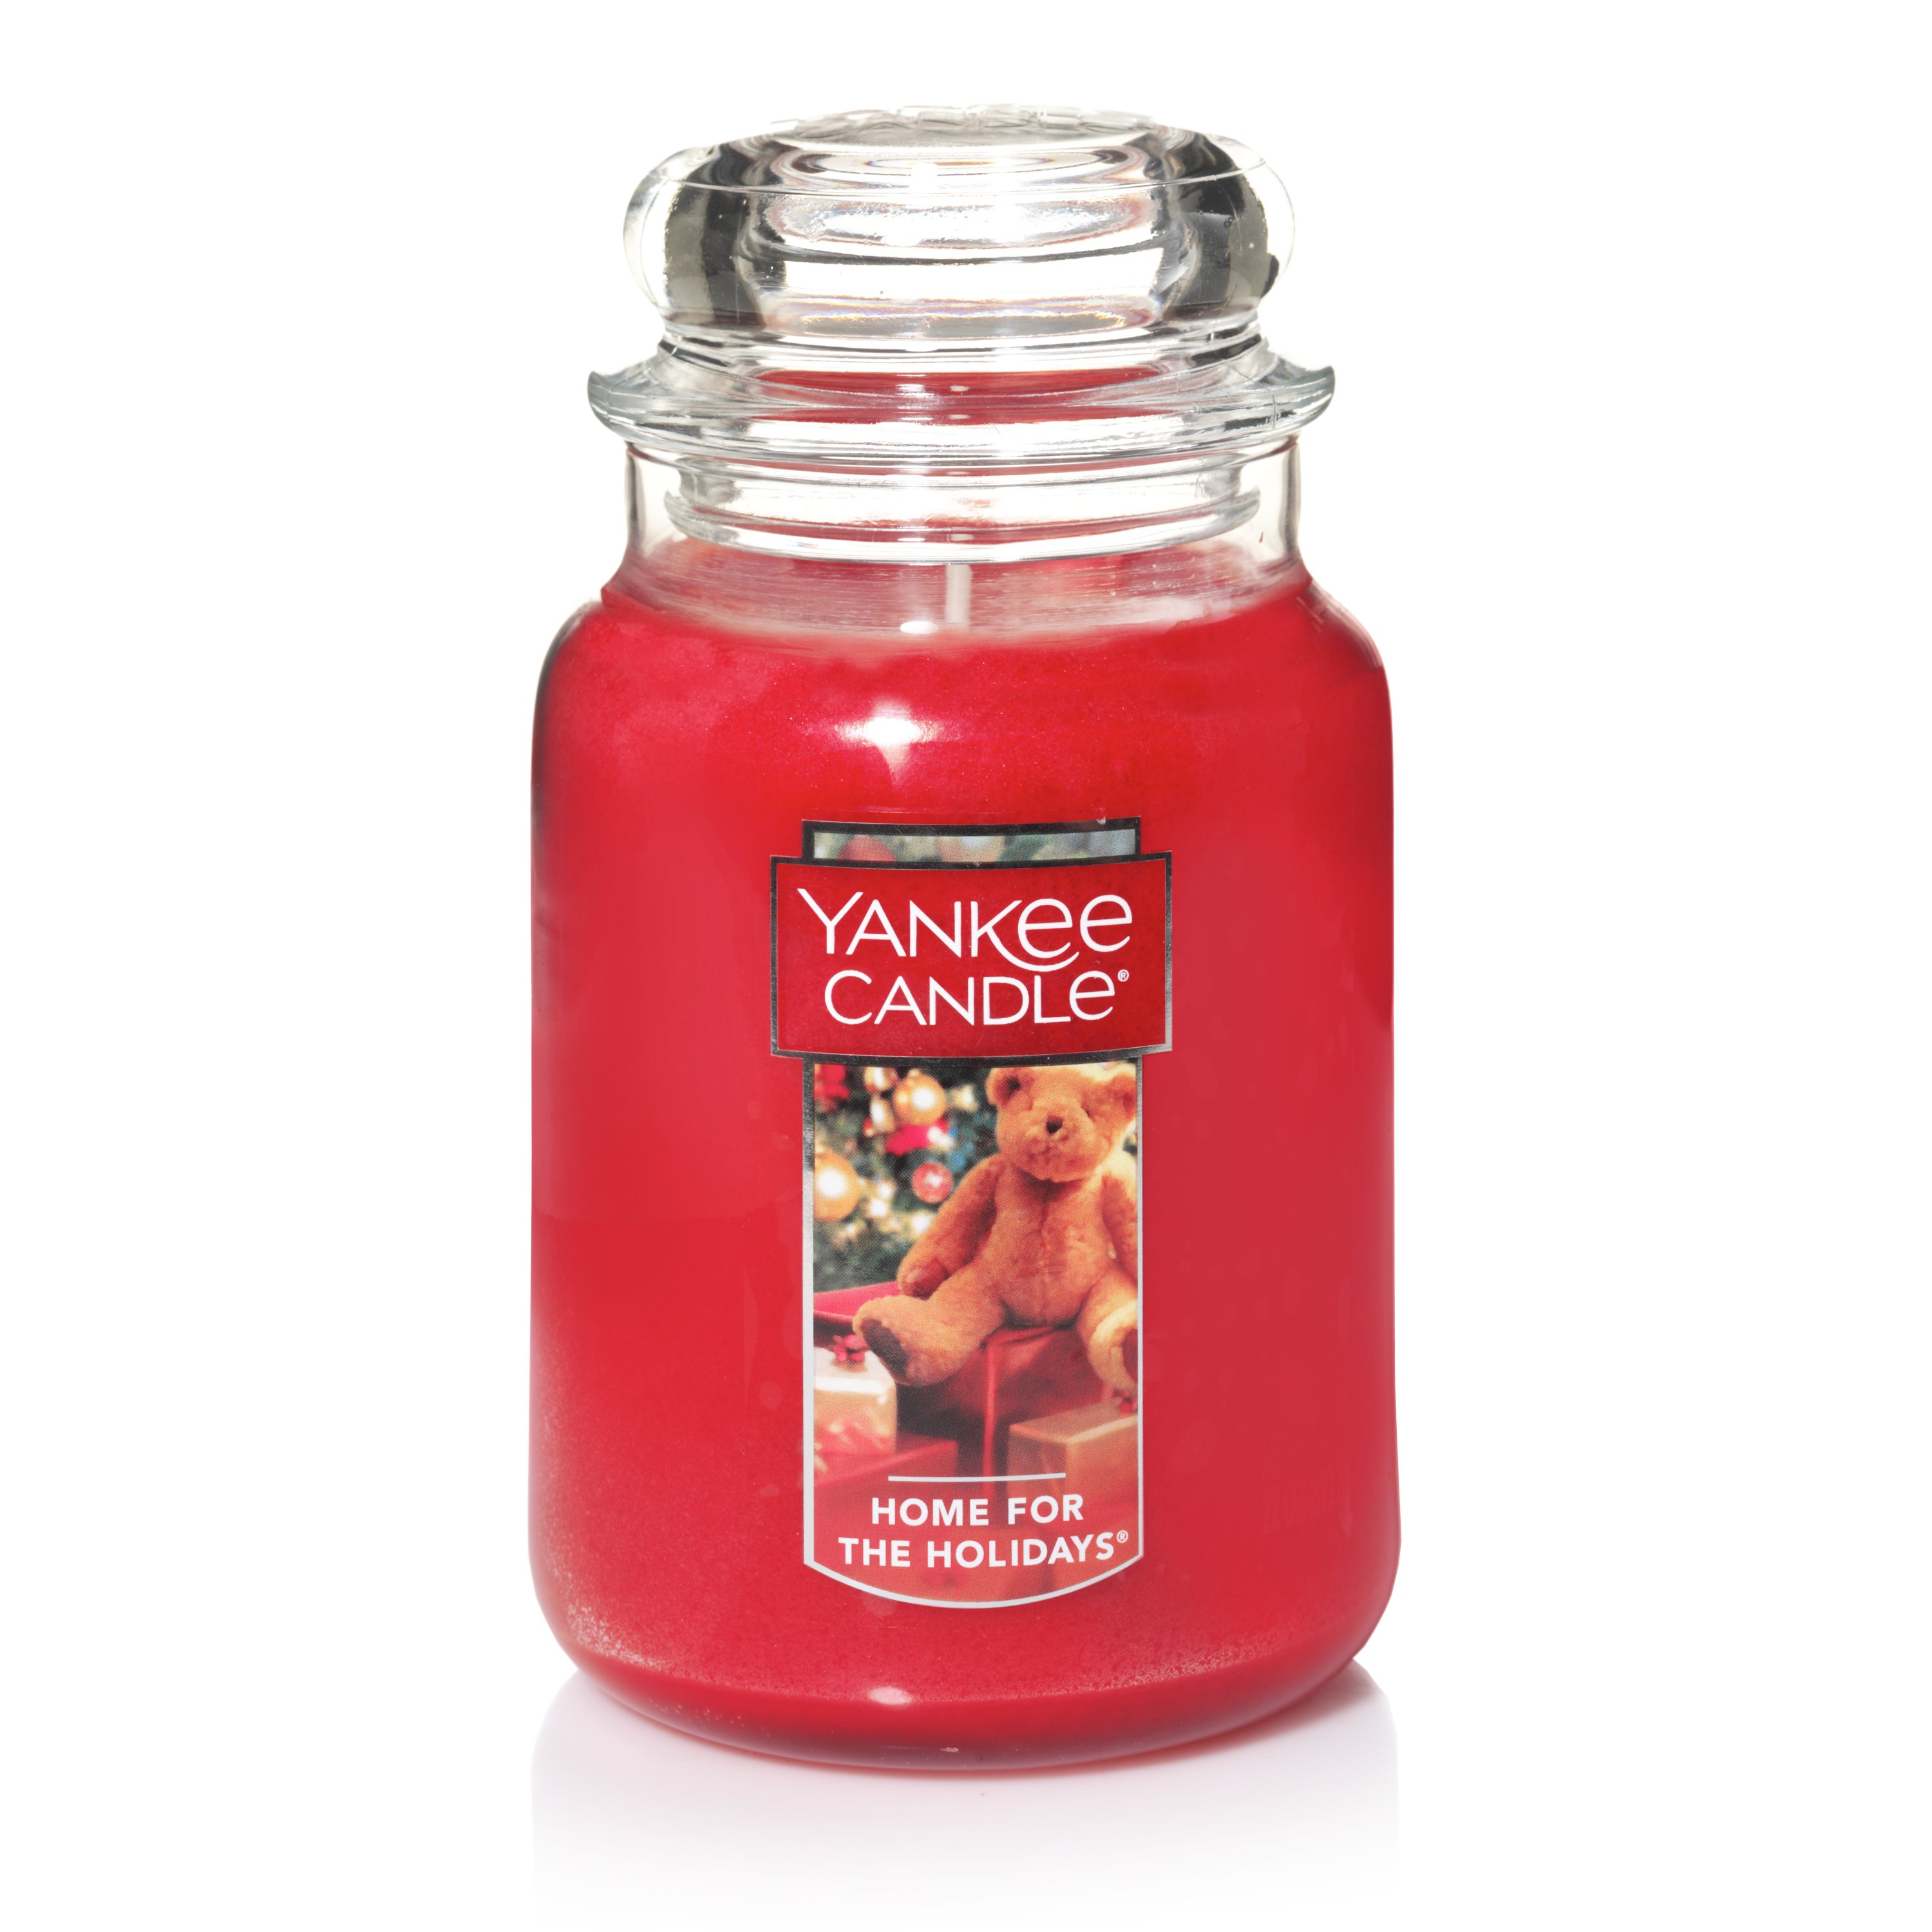 Yankee Candle Holiday Home Sweet Home Large Jar 22oz Green Stockings Christmas 